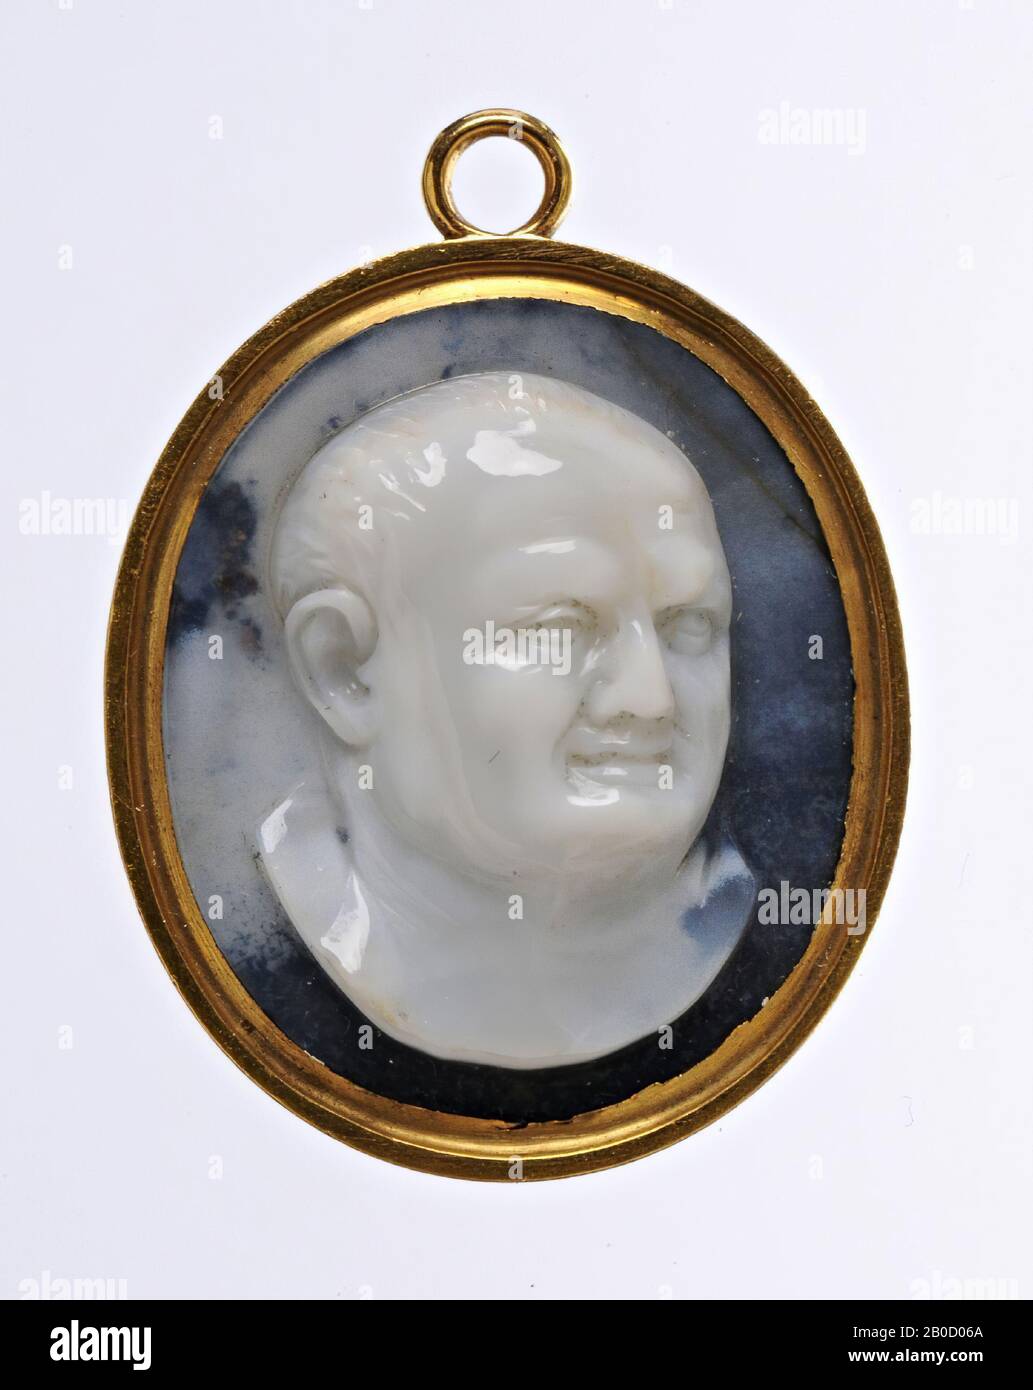 Cut stones, cameo, agate, 2 layers, Color, white, blue-white spotted, Shape, oval, standing, Machining, in gold pendant, Method of manufacture, 28 x 24 mm, D. 7 mm, wt., 9.59 gr, 18th century 1700-1800 Stock Photo